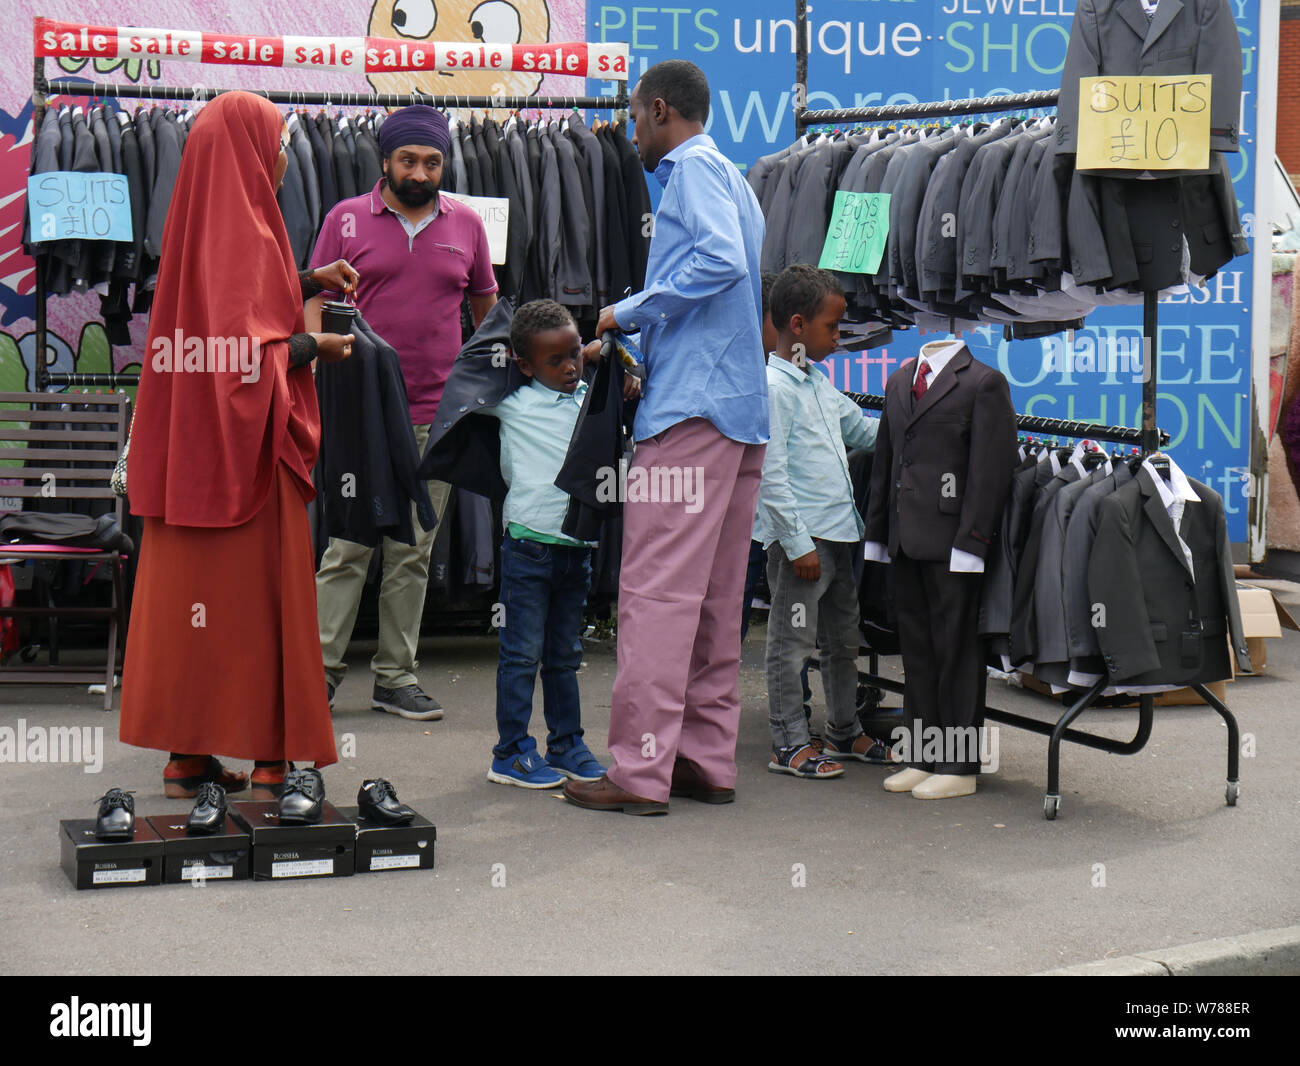 Family out shopping for boys suits on an outdoor market in England UK, one boy tries on a jacket while parents negotiate a price.  photo DON TONGE Stock Photo